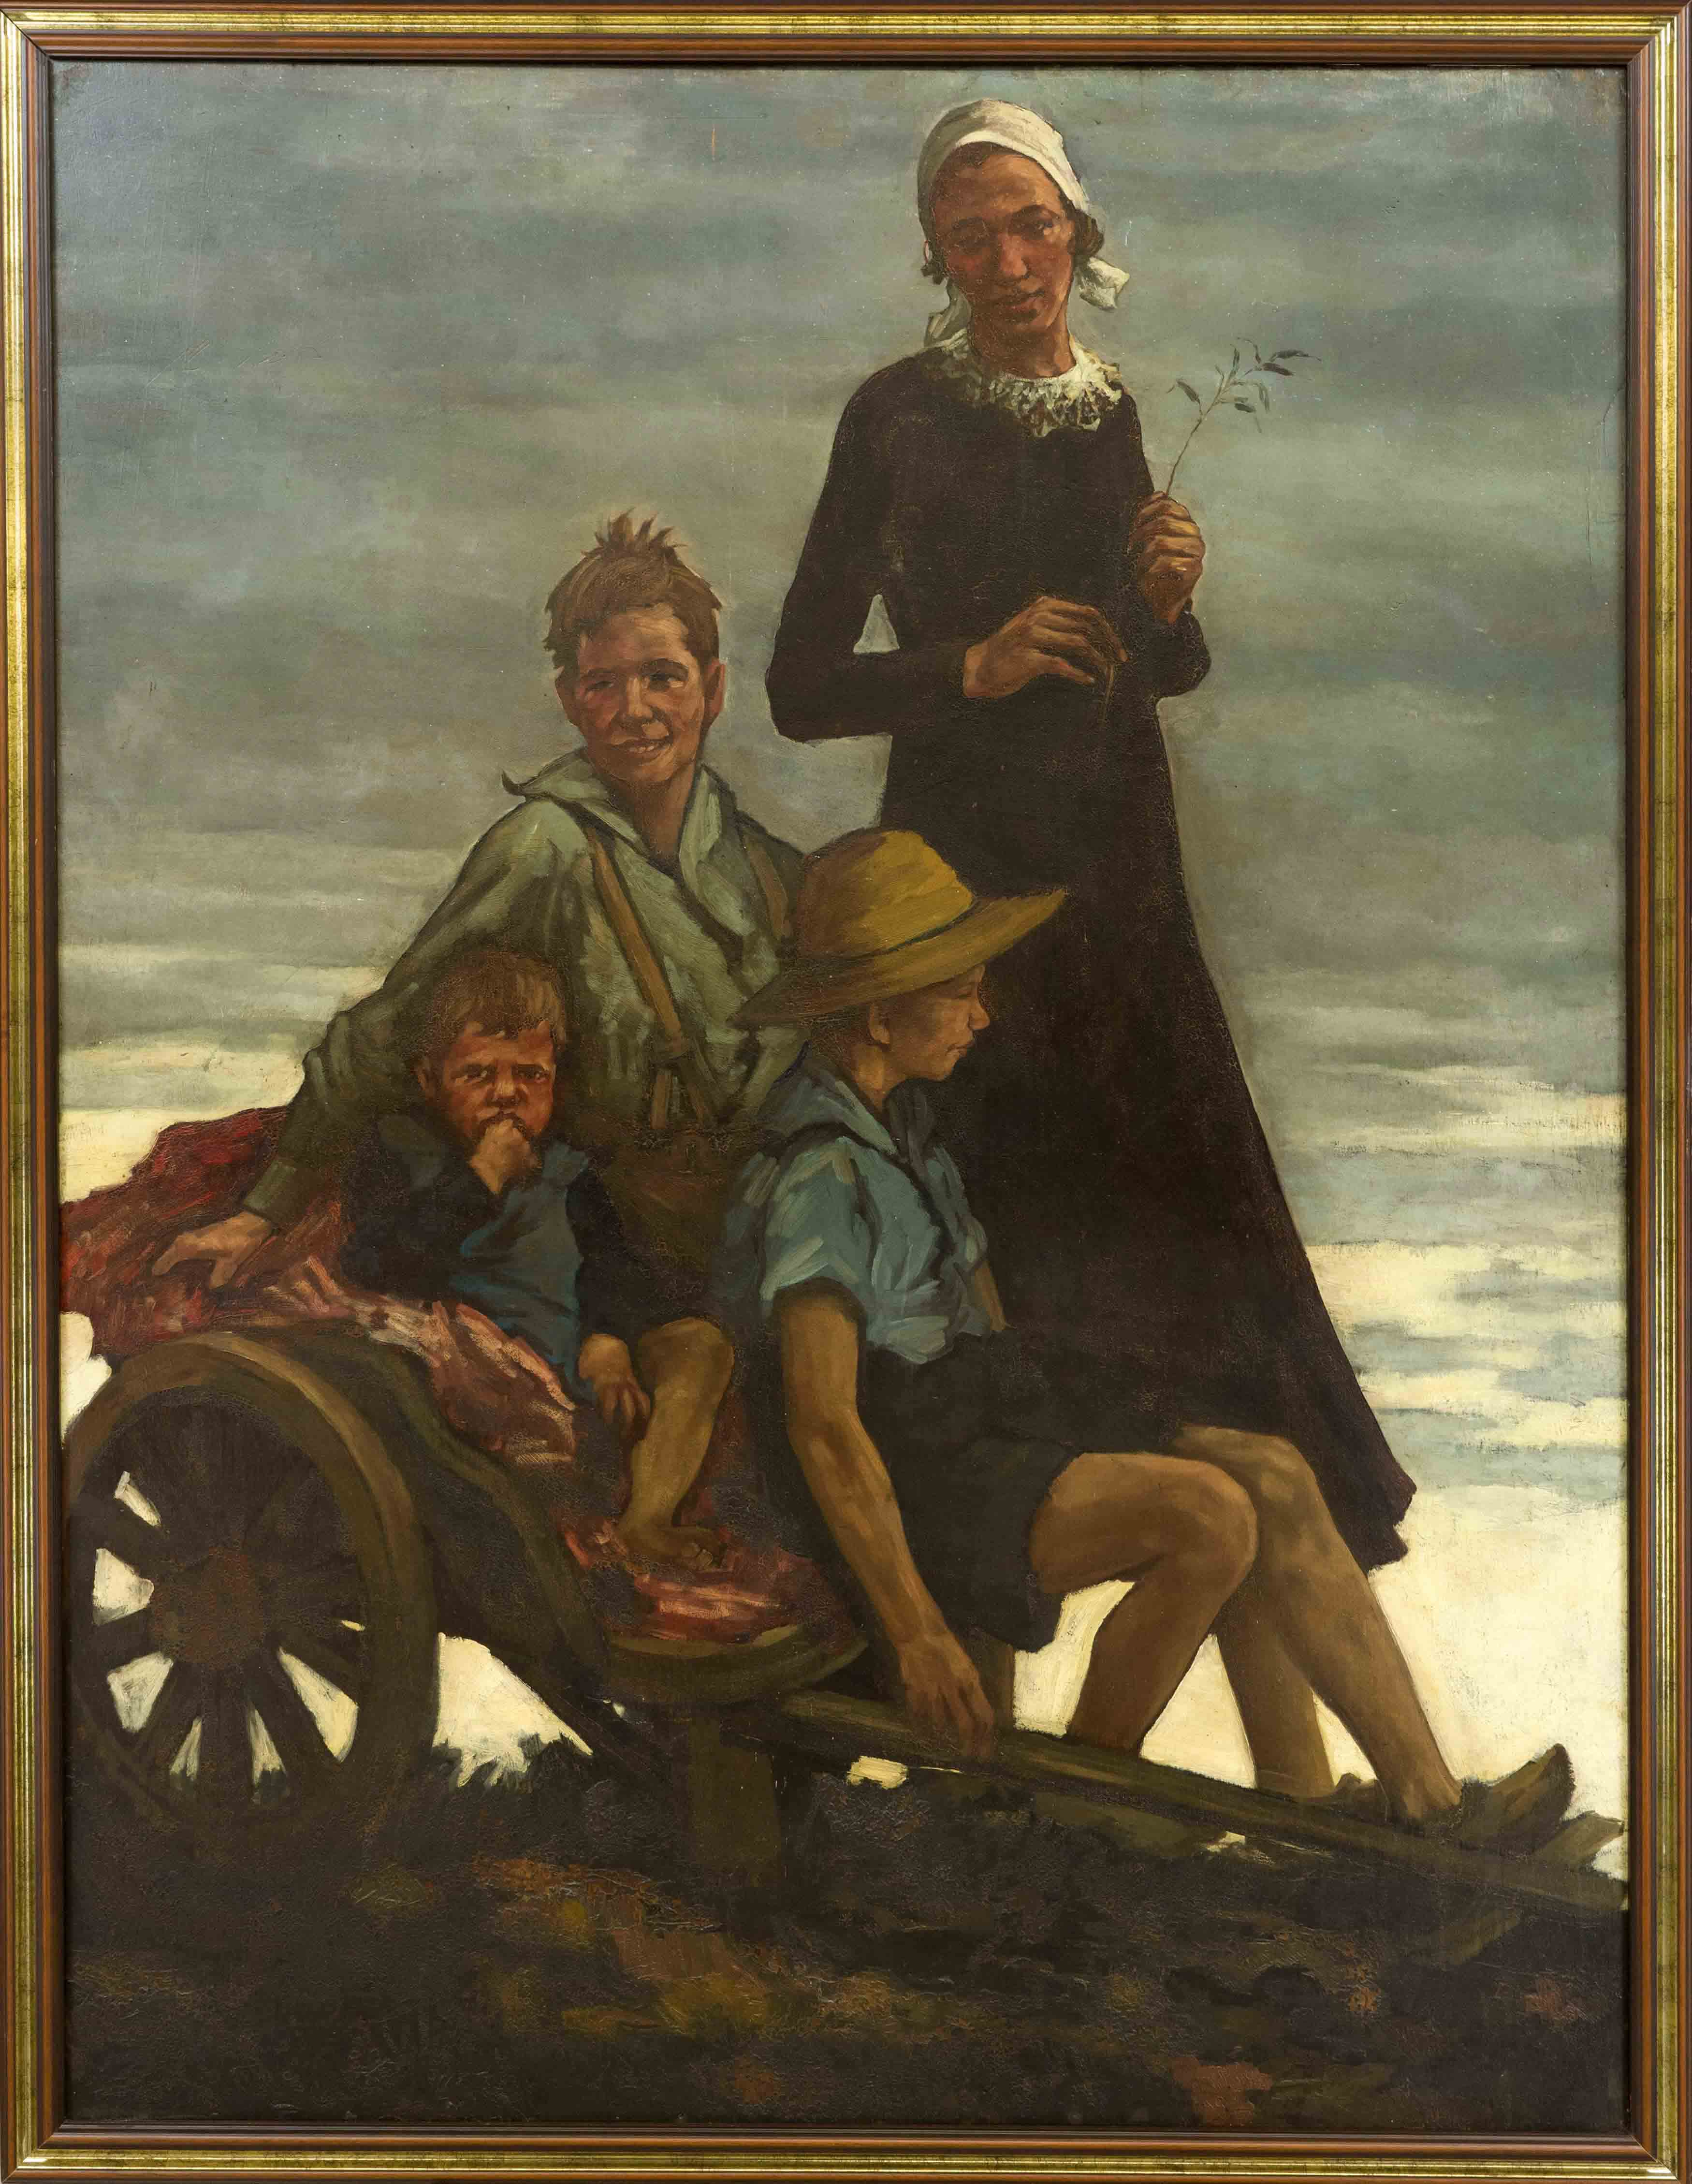 Anonymous genre painter c. 1920, Refugee Family, large work in oil on plywood, unsigned, 130 x 100